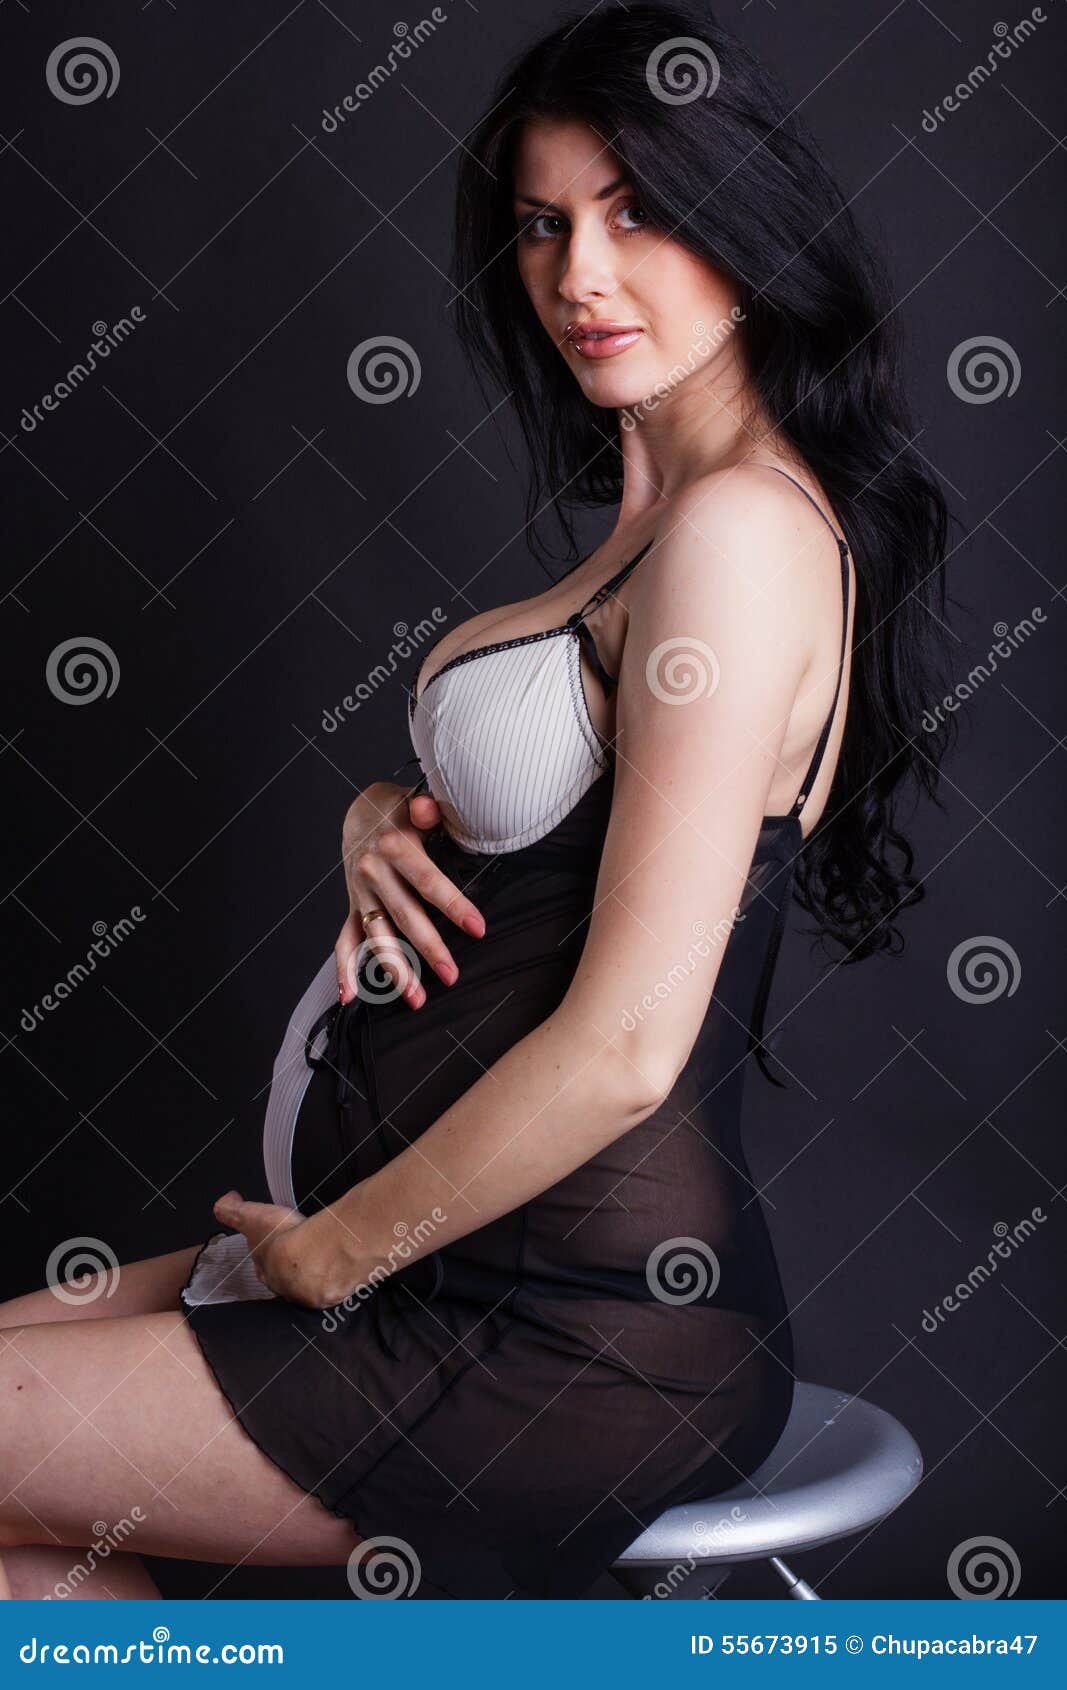 Pregnant Girl is Wearing Black Negligee Stock Image